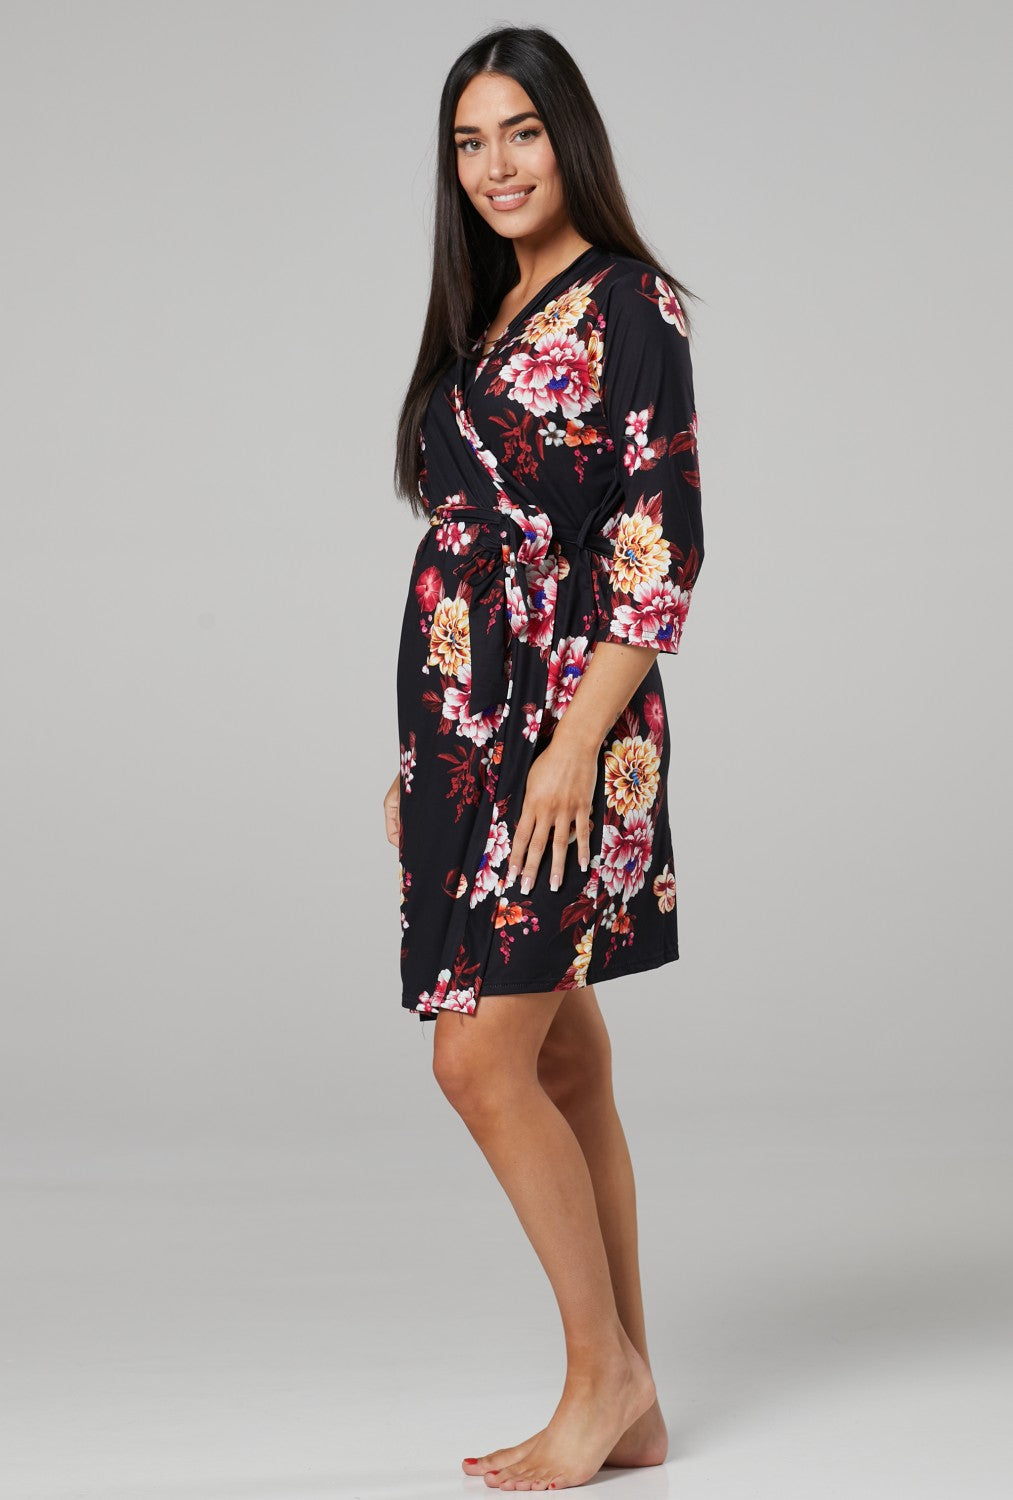 Labor & Delivery Gown in Floral Print